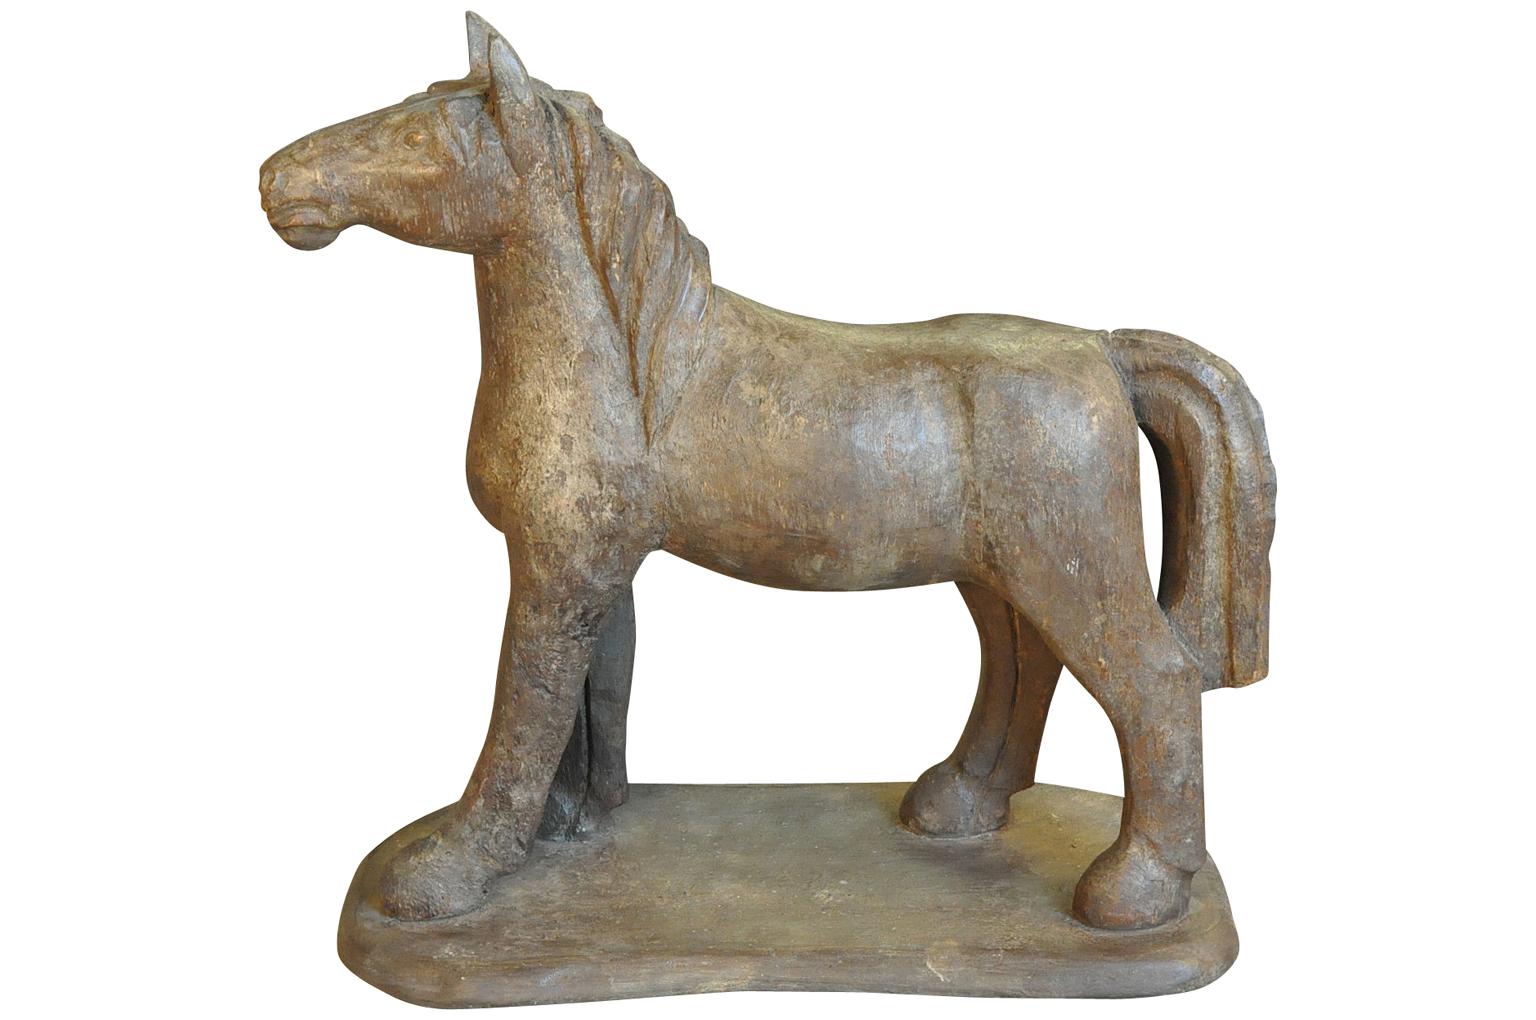 A very charming early 19th century French horse papier mache mold. A wonderful accent piece for any horse lover.